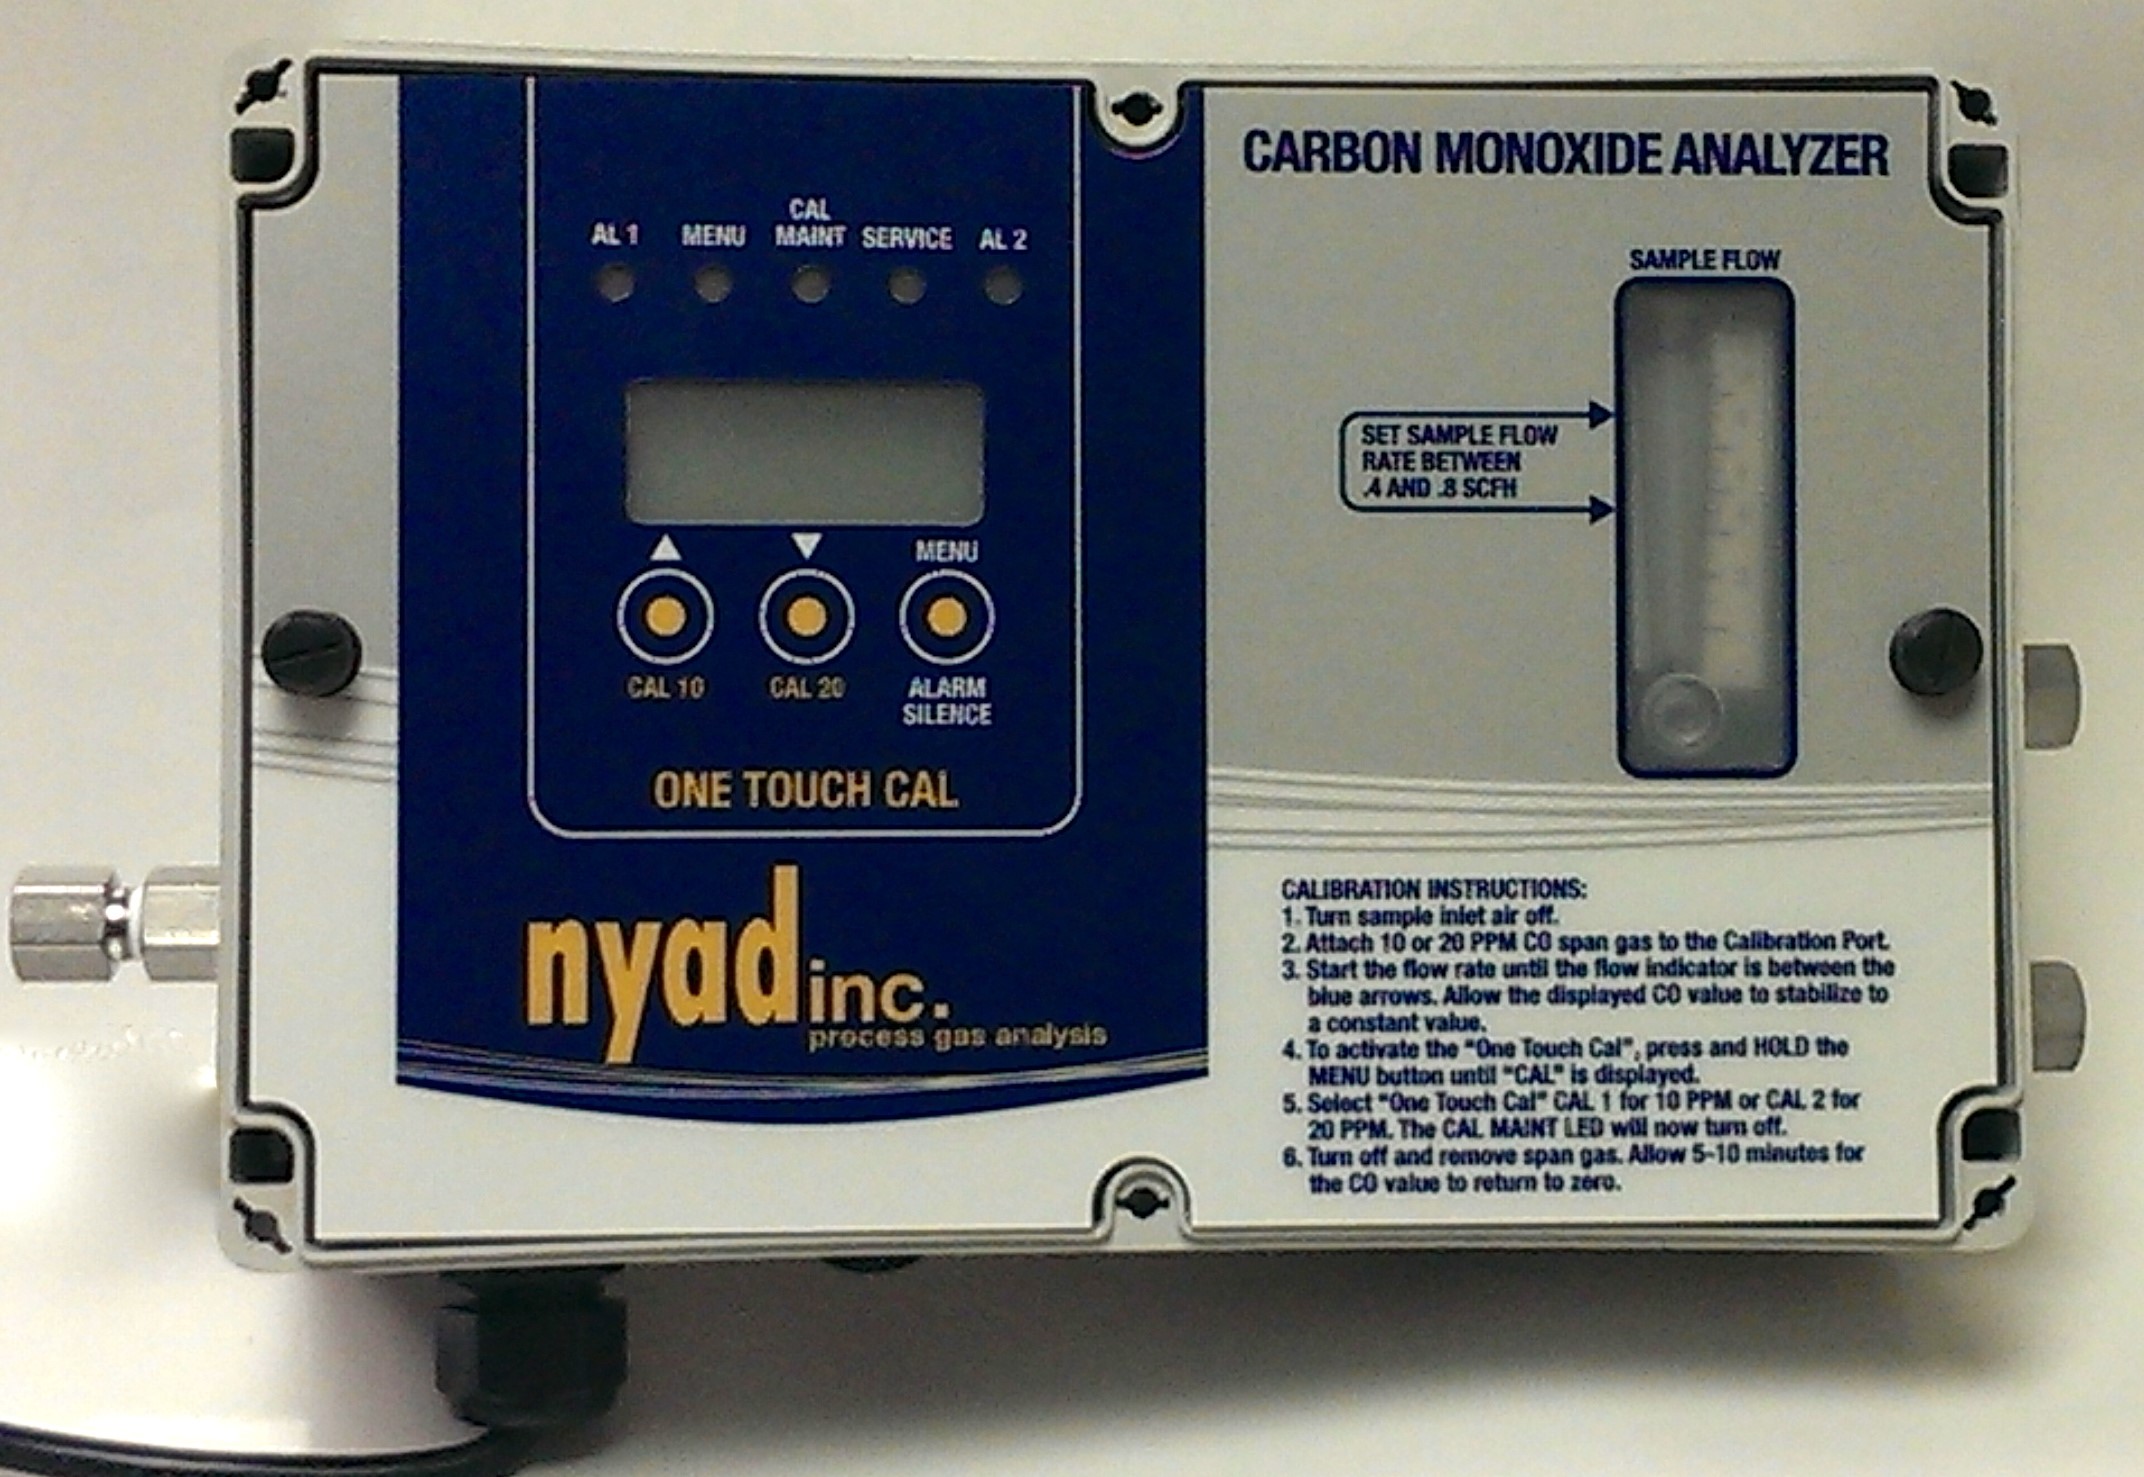 SERIES 301T ONE TOUCH CARBON DIOXIDE ANALYZERS